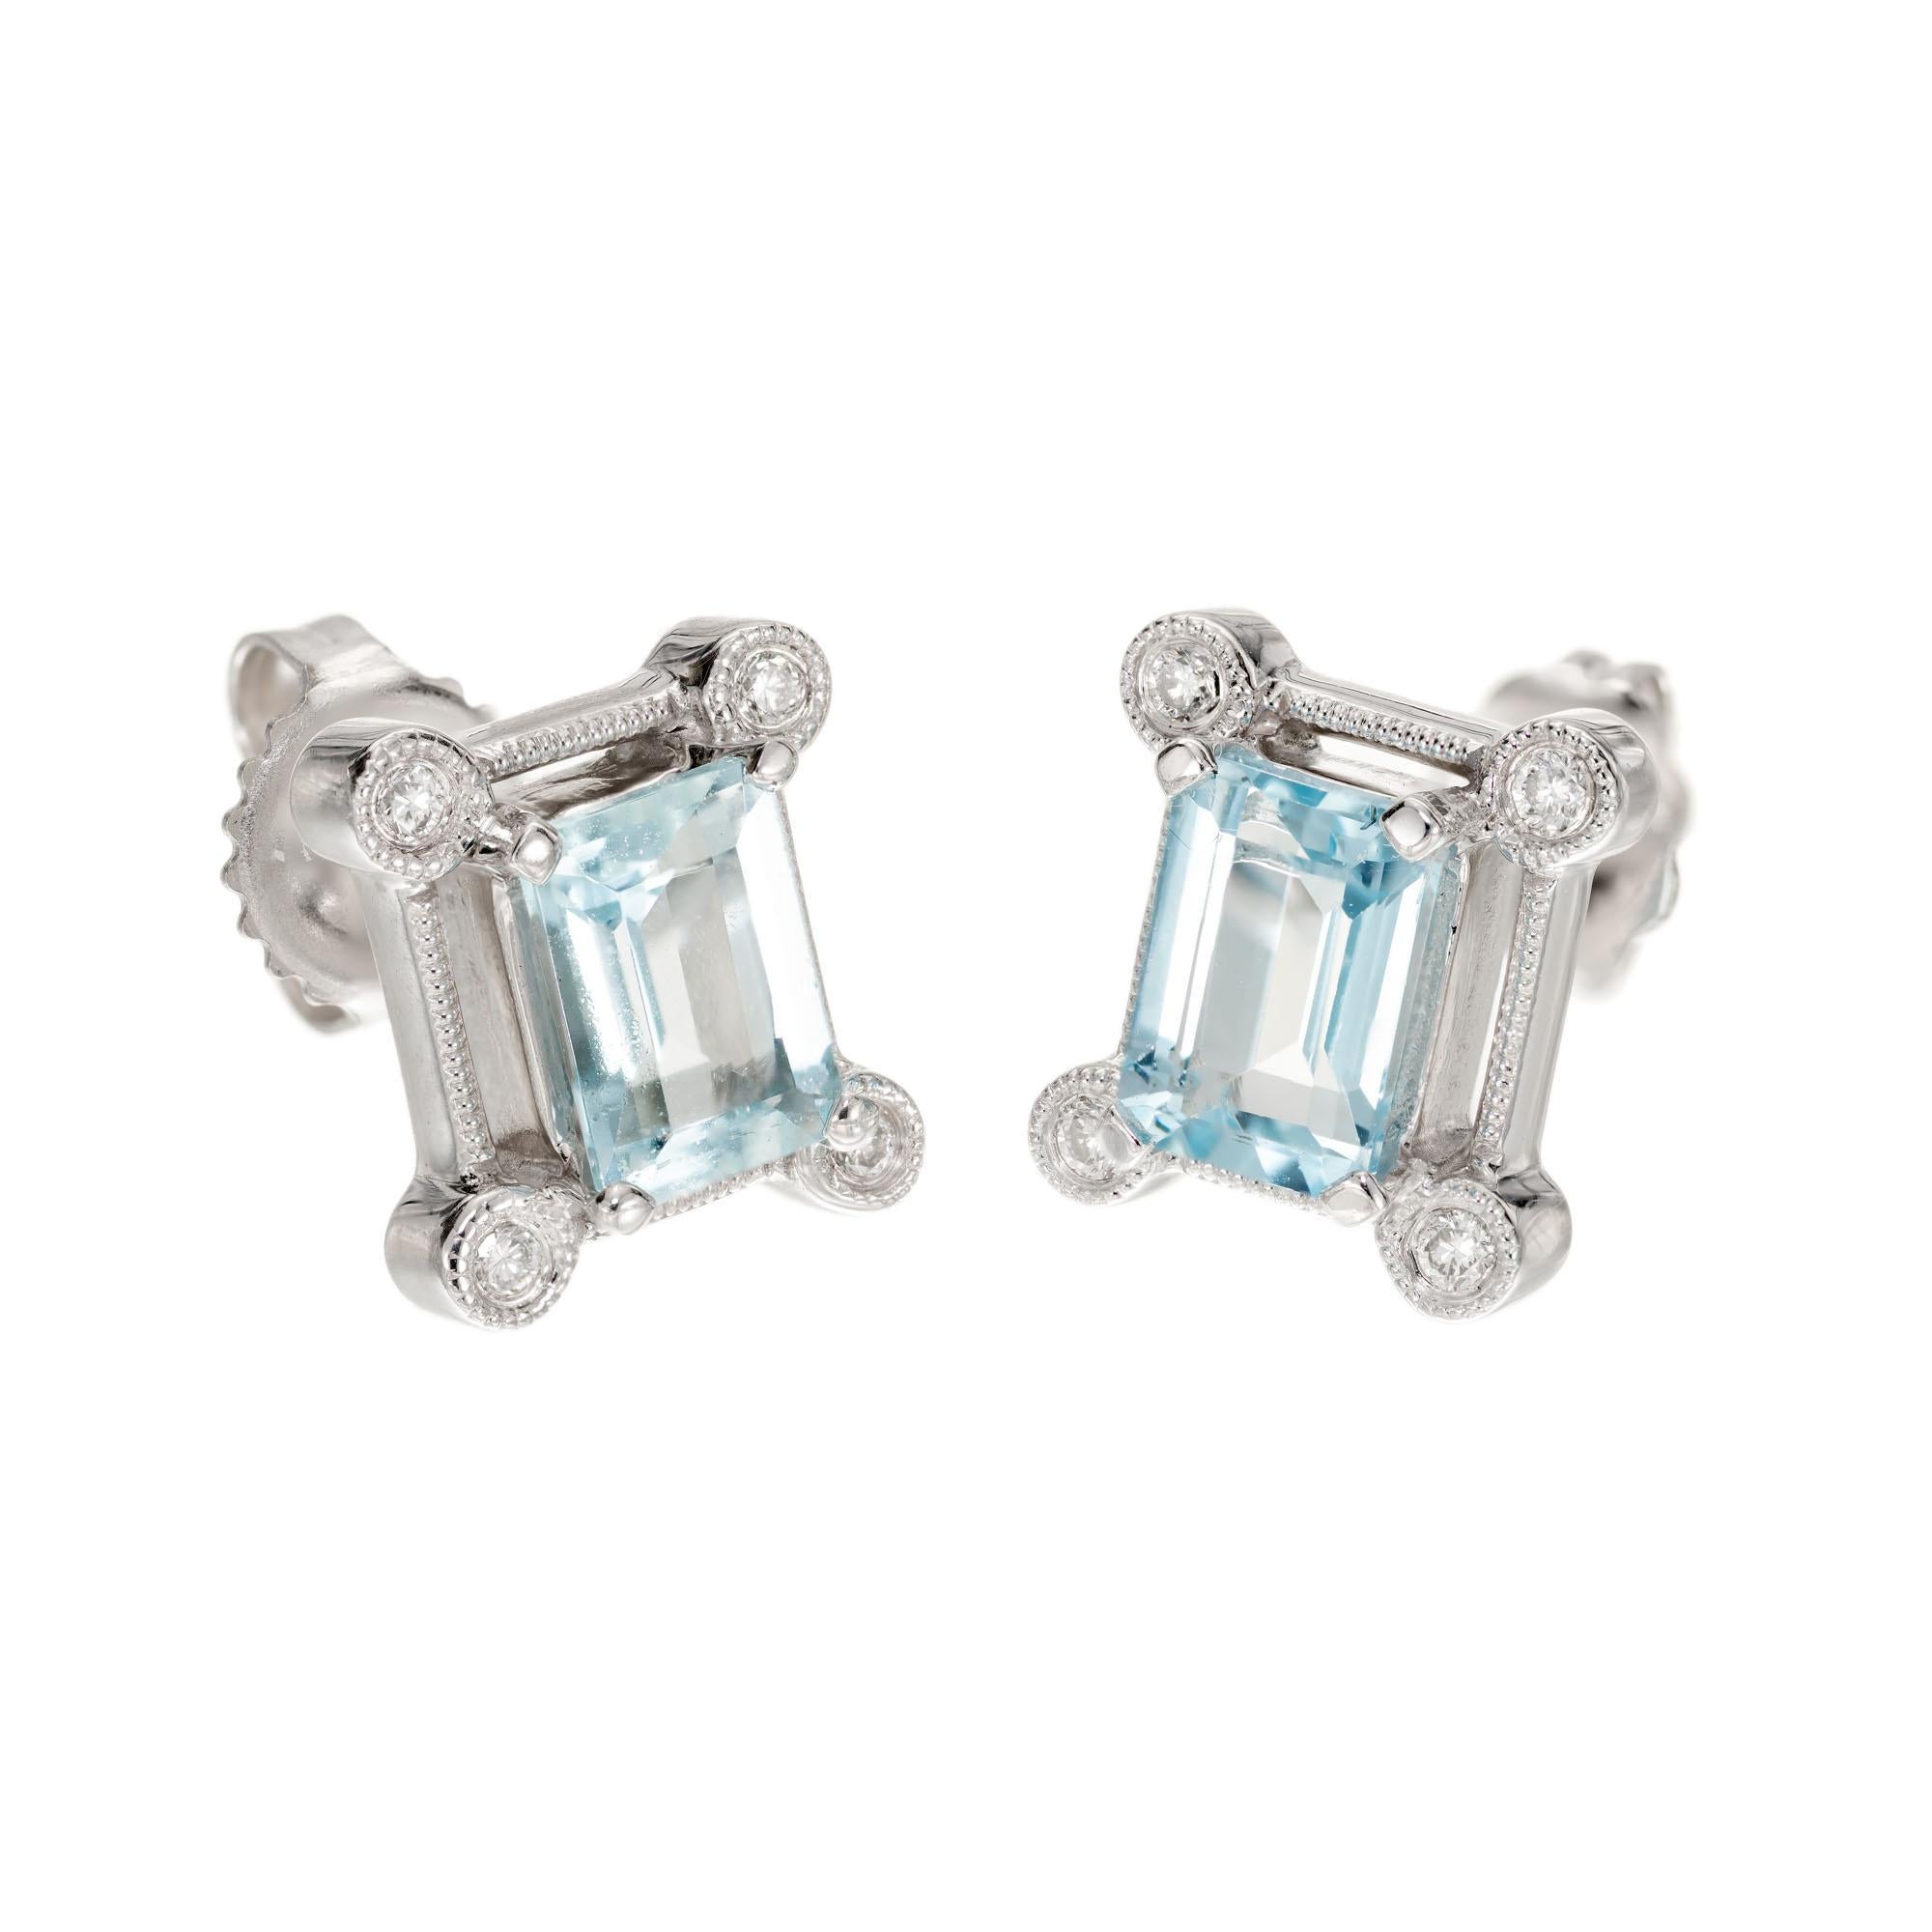 1.80 carat rectangular natural Aqua earrings with bright full cut Diamond accents in 14k white gold settings. 

2 Emerald cut blue Aquamarines, approx. total weight 1.80cts, 7.2 x 5.1mm
8 round full cut Diamonds, approx. total weight .08cts, H,